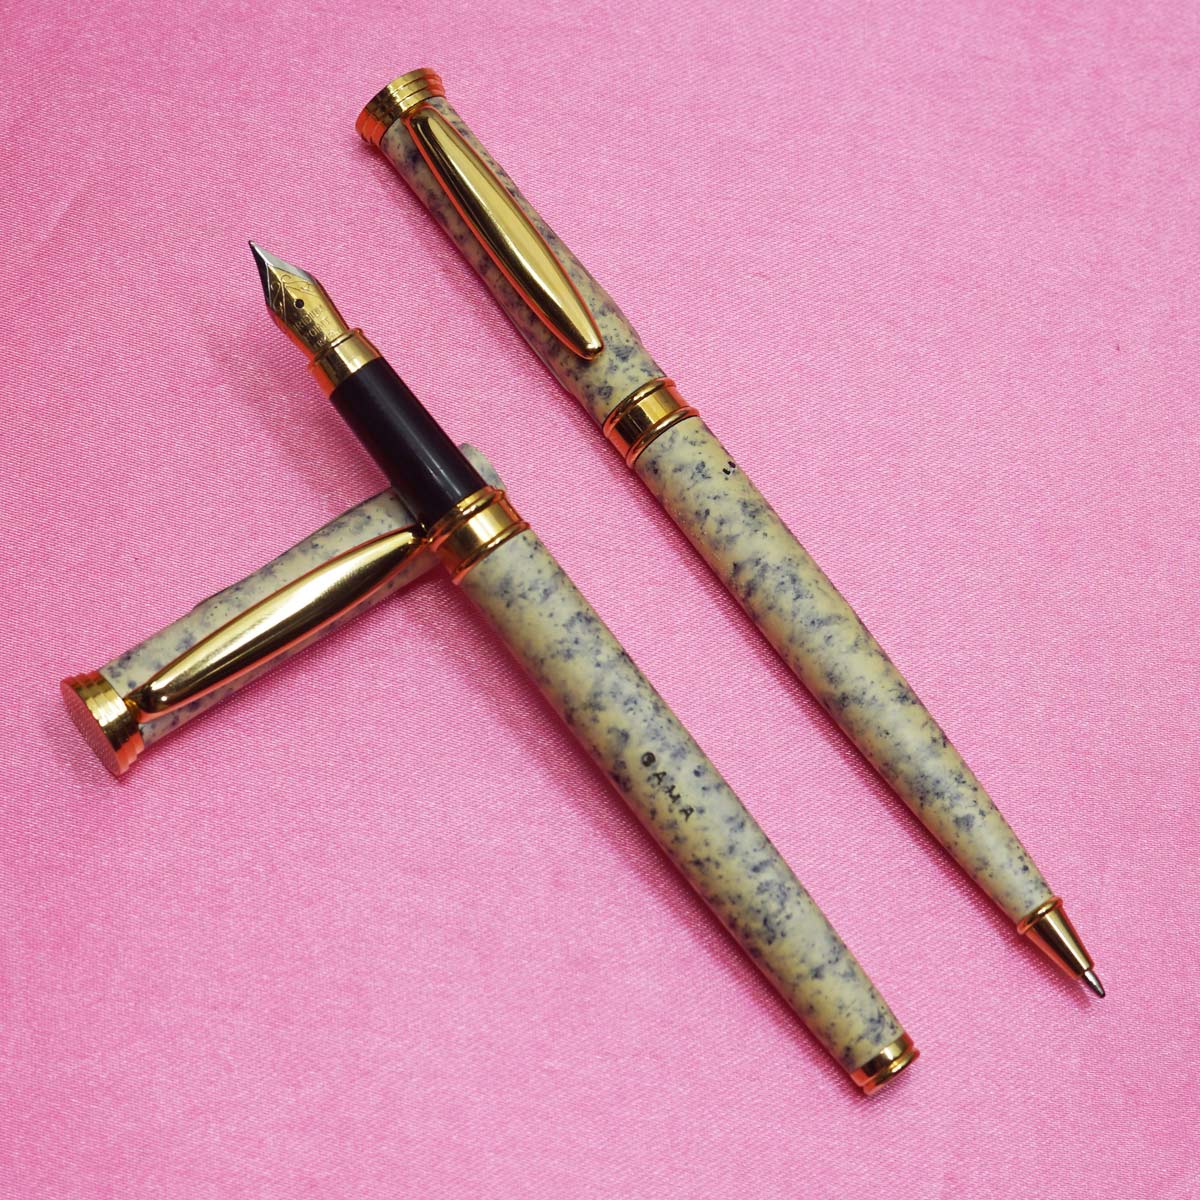 Gama White Marble Design Cap and Body with Gold Trims No.5 Dual Tone Fine Tipped Convertor Type Fountain Pen and Ball Pen Set SKU 22289